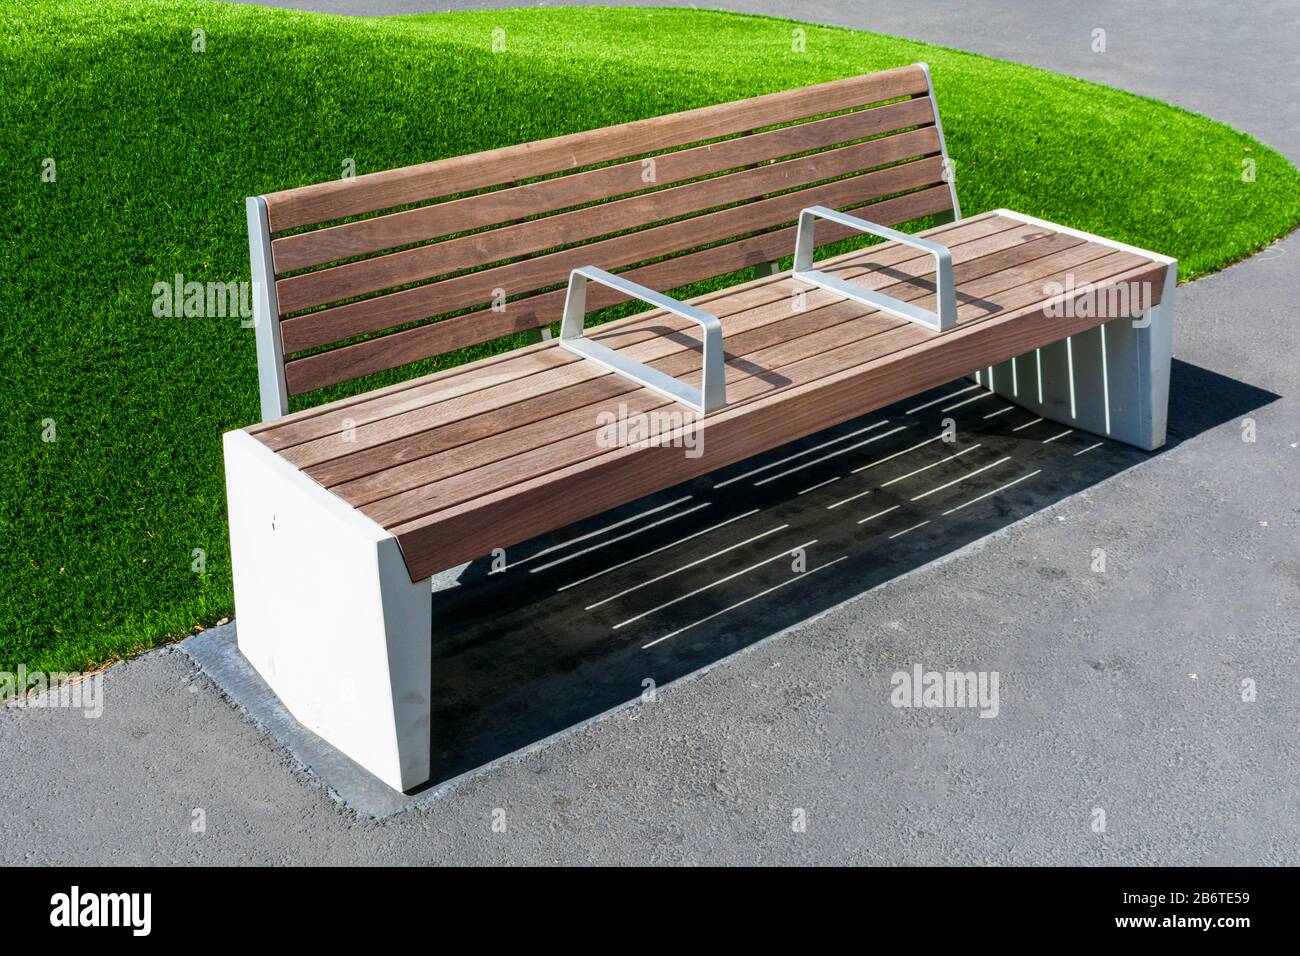 Empty bench with armrest in the middle to prevent people from sleeping, resting or lying down on the bench in the park. Stock Photo